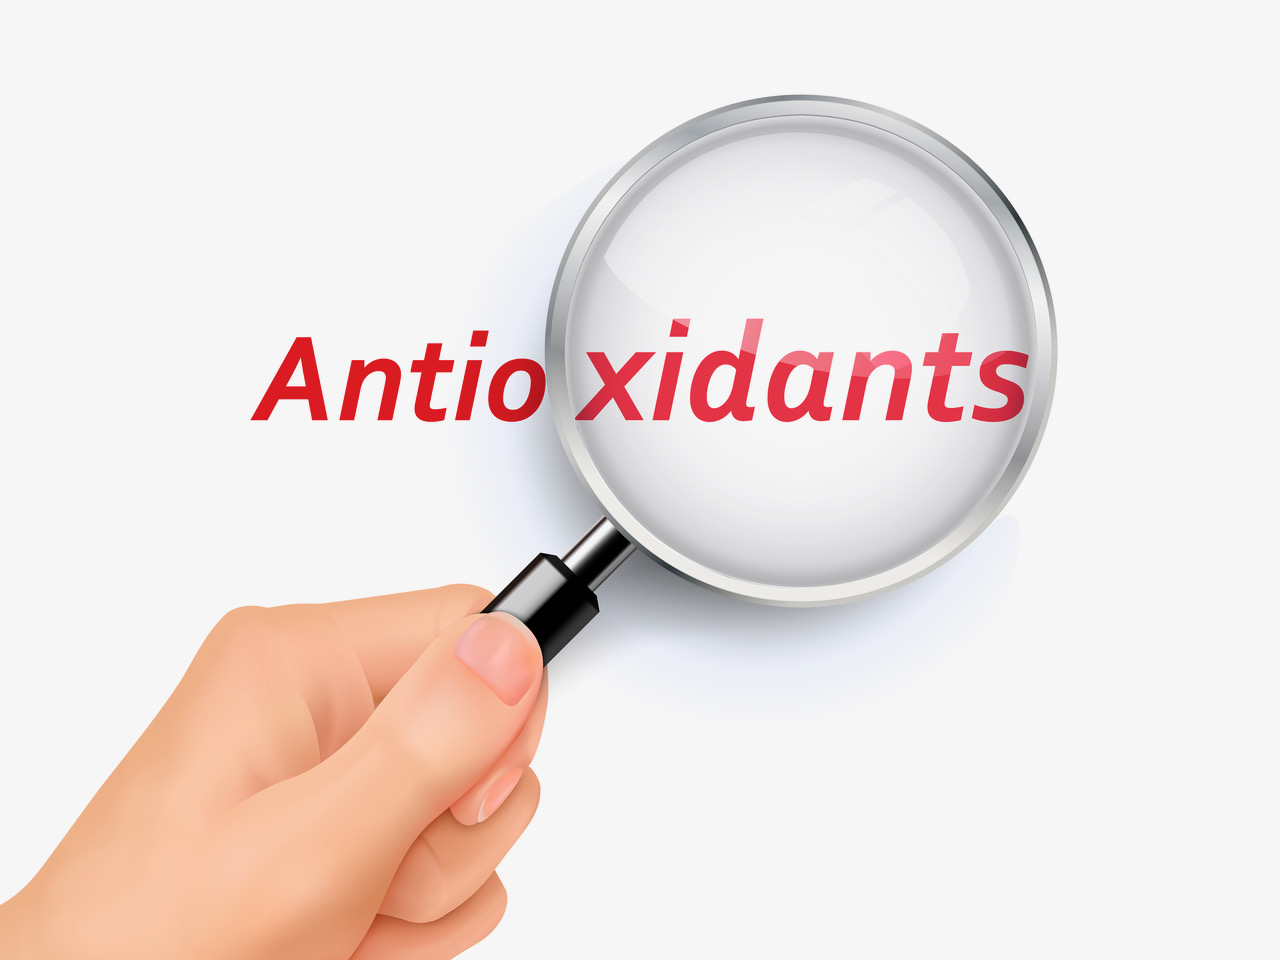 The word antioxidants written in red with a magnifying glass over it held by a hand.